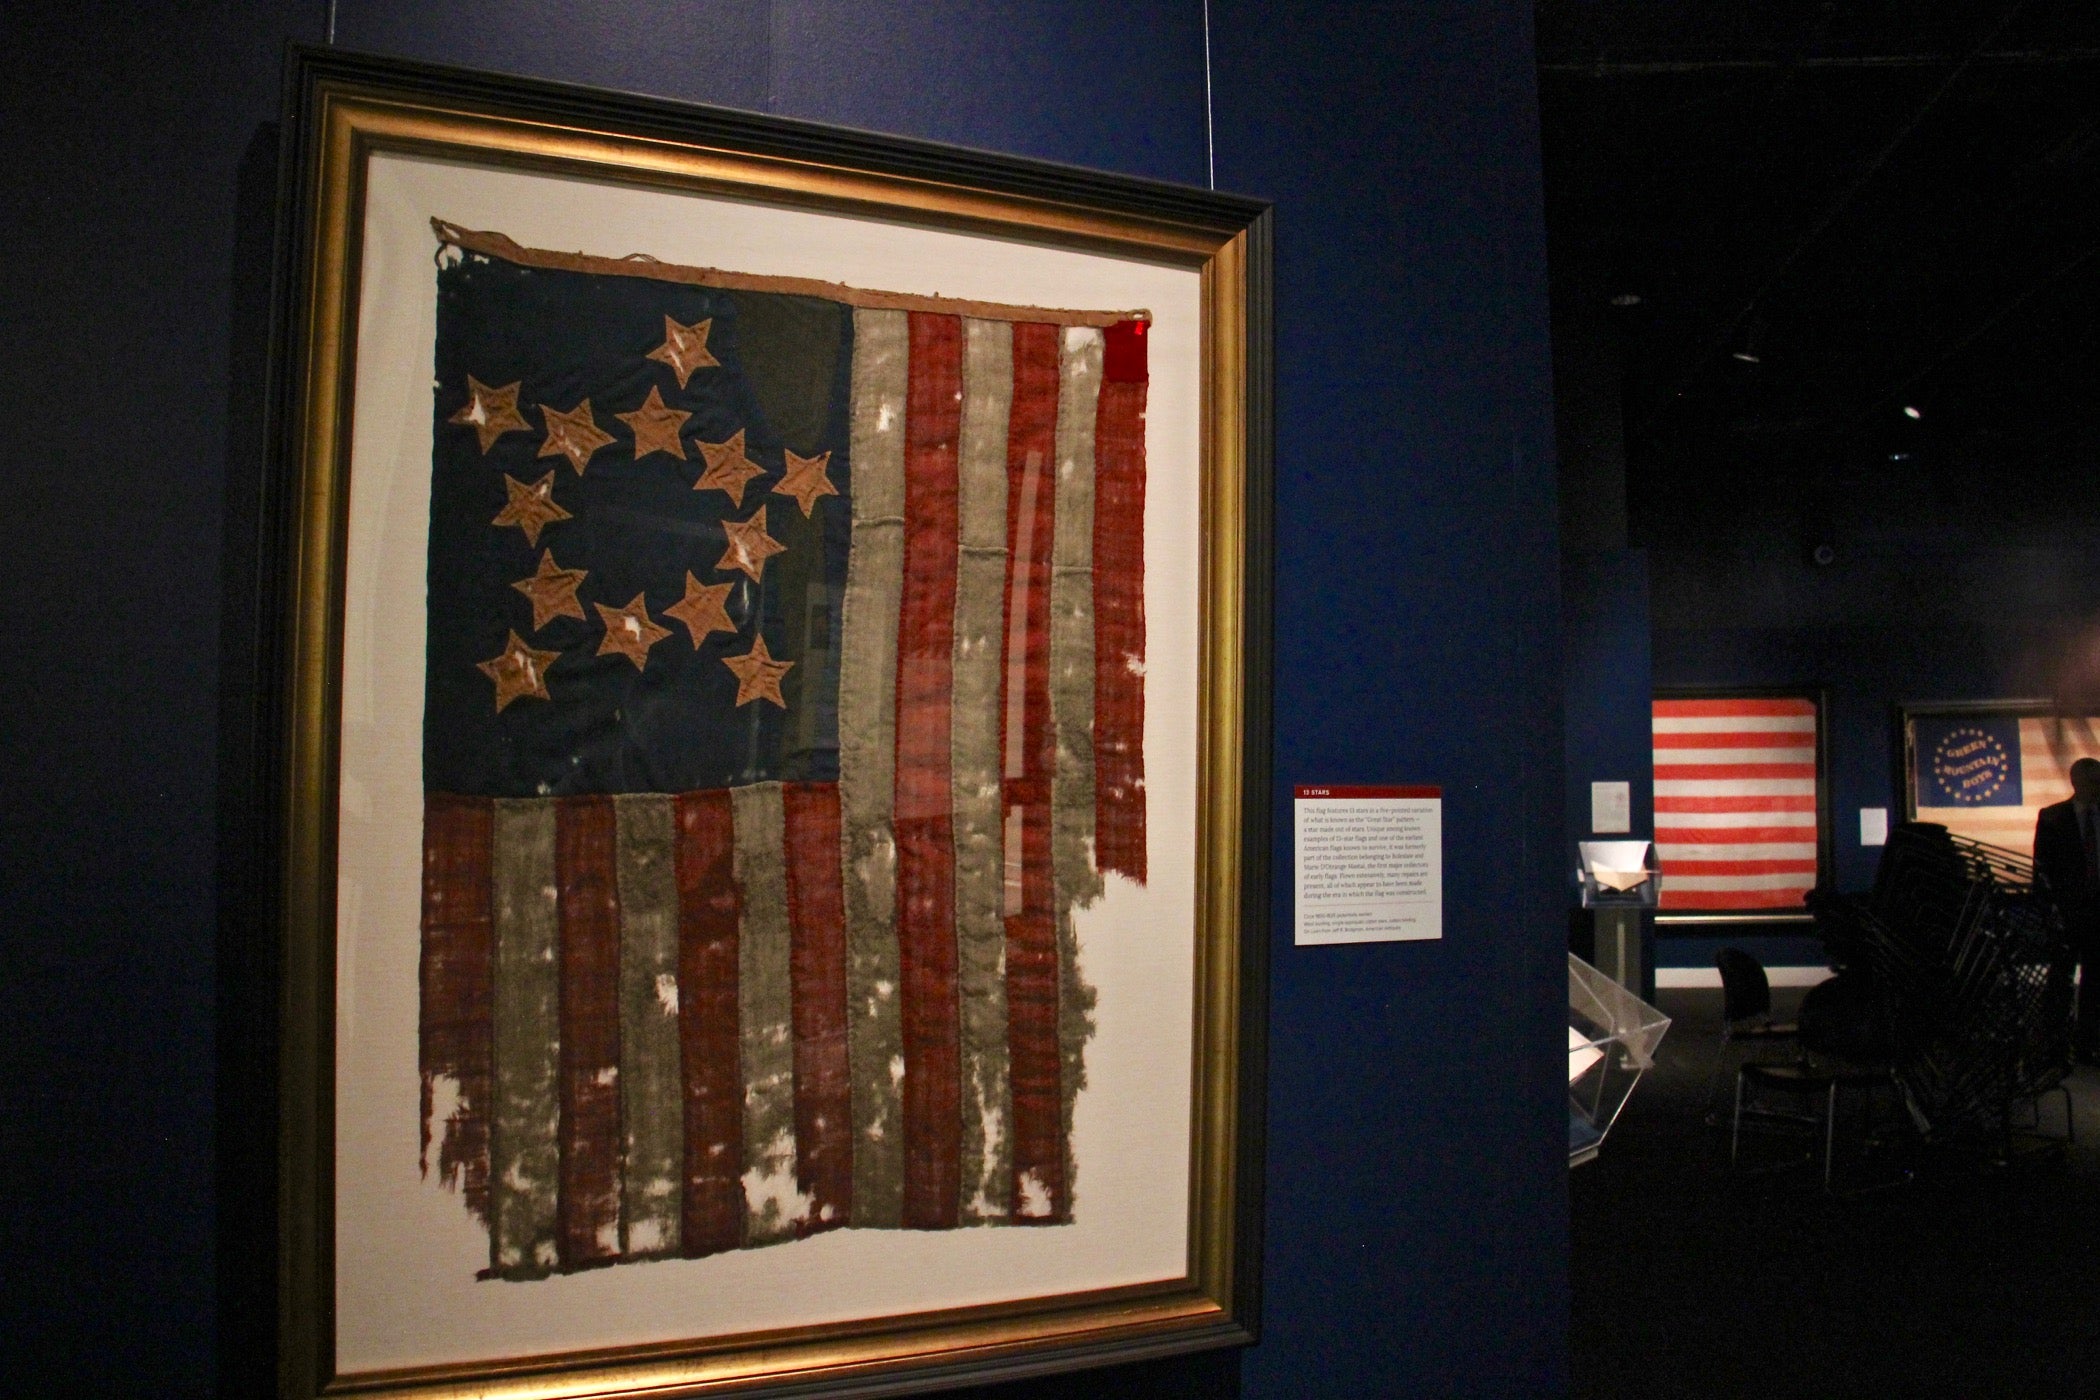 https://whyy.org/wp-content/uploads/2021/06/2021-06-10-e-lee-philadelphia-museum-of-the-american-revolution-flags-and-founding-documents-exhibit-oldest-flag.jpg